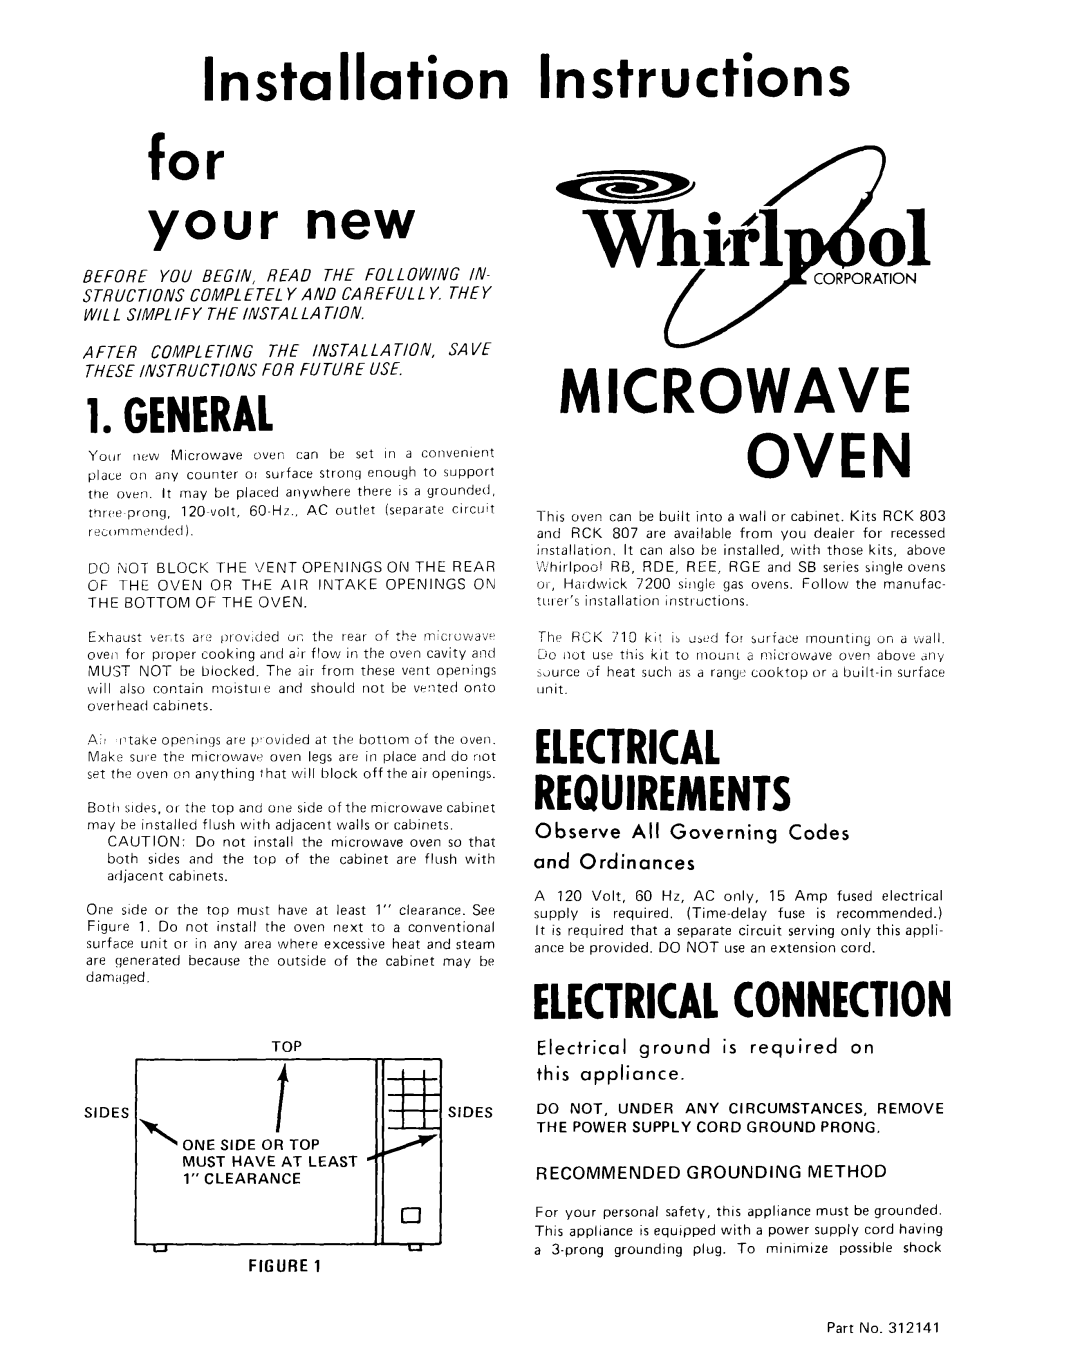 Whirlpool 312141 installation instructions Observe All Governing Codes and Ordinances, Recommended Grounding Method 